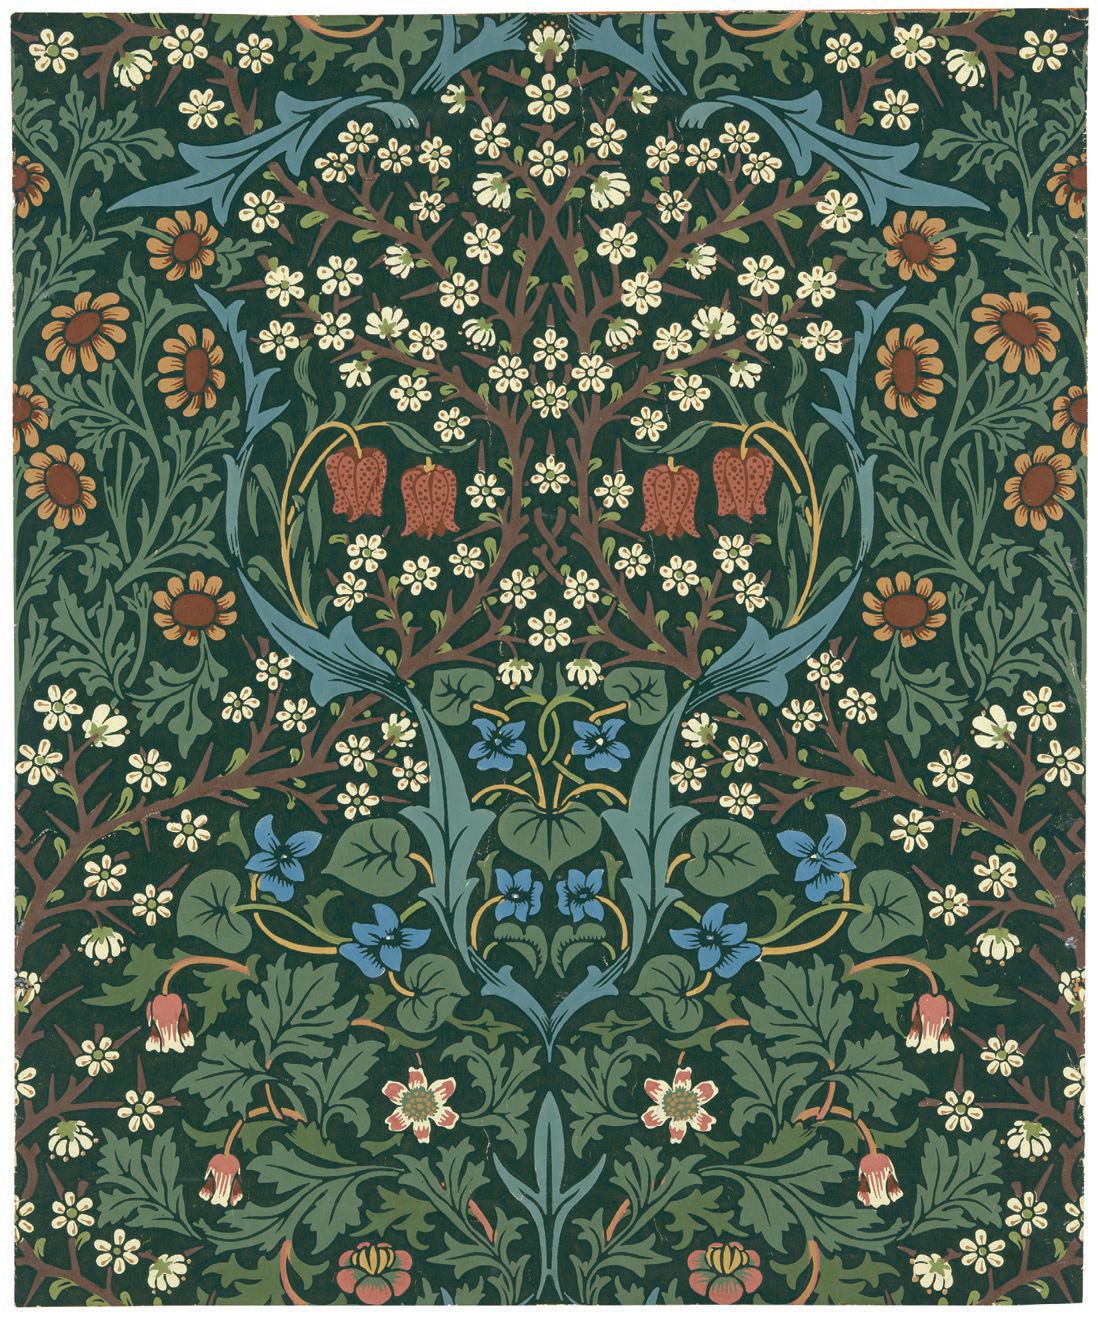 “Blackthorn,” 1892, designed by John Henry Dearle, produced by Morris & Co., London, printed at Jeffrey & Co., London PHOTO COURTESY OF THE ART INSTITUTE OF CHICAGO/GIFT OF CRAB TREE FARM FOUNDATION